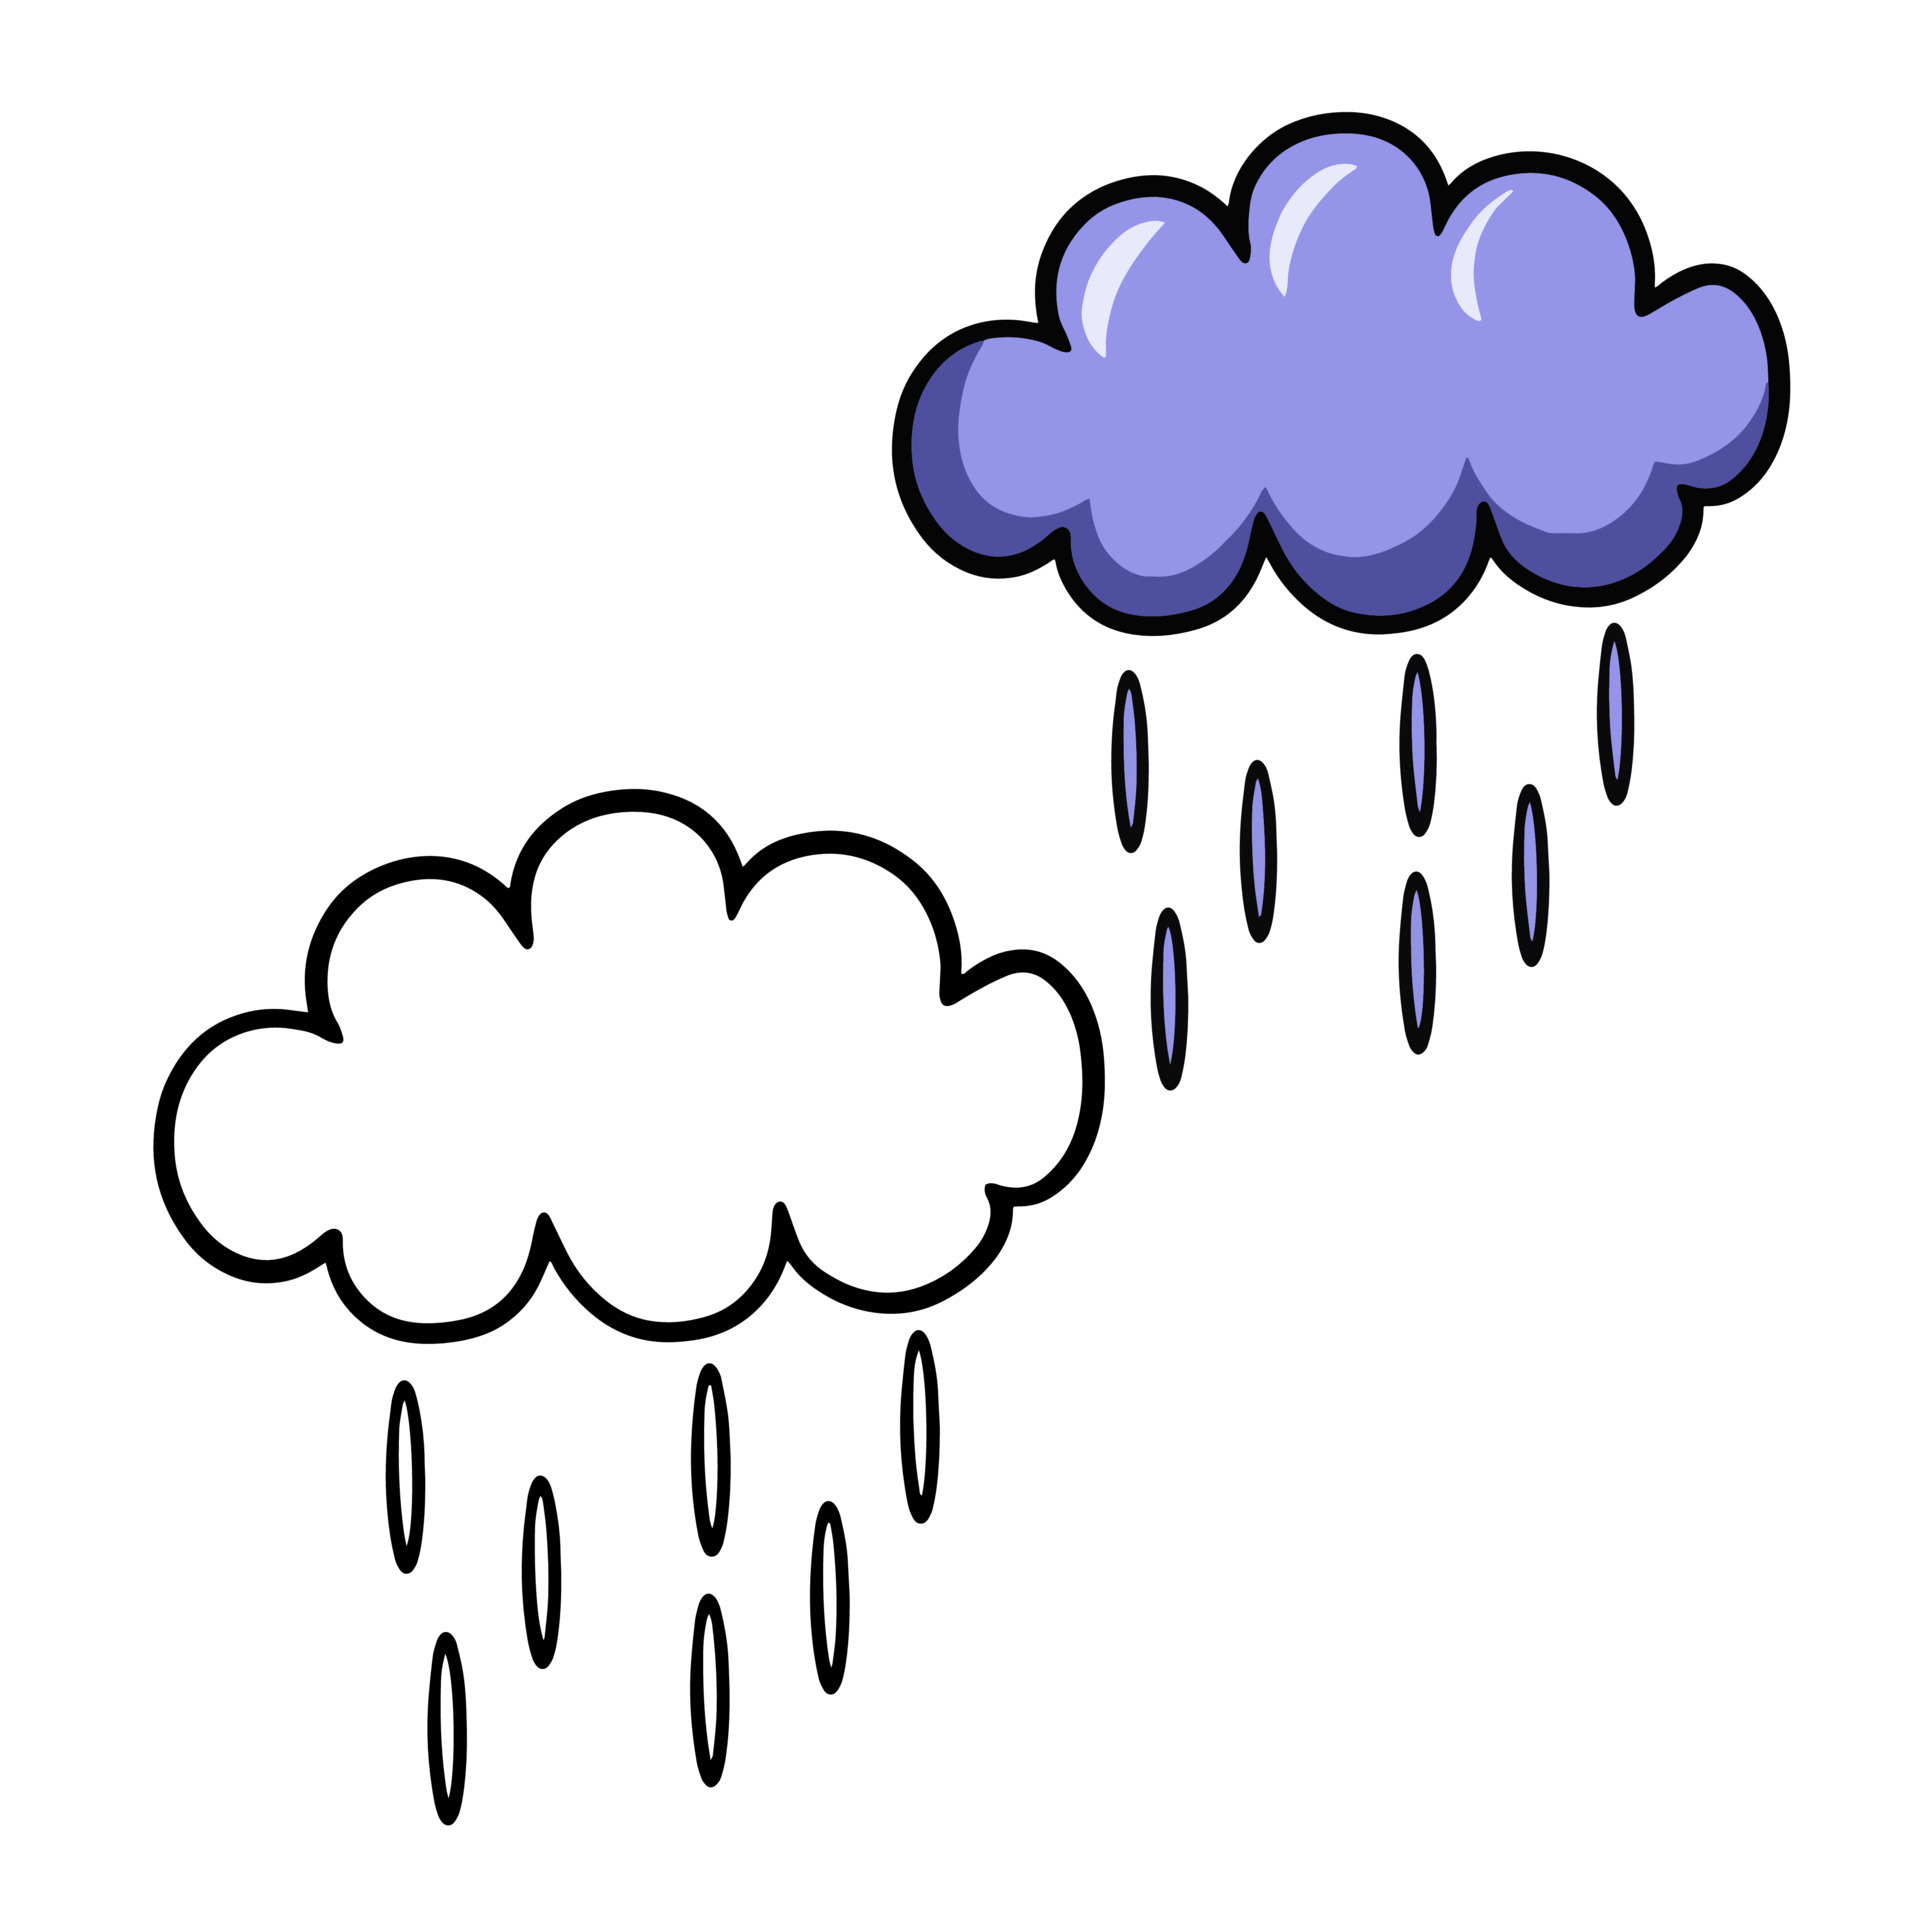 Chibi Raindrop Coloring Page For Children Outline Sketch Drawing Vector,  Puddle Drawing, Puddle Outline, Puddle Sketch PNG and Vector with  Transparent Background for Free Download